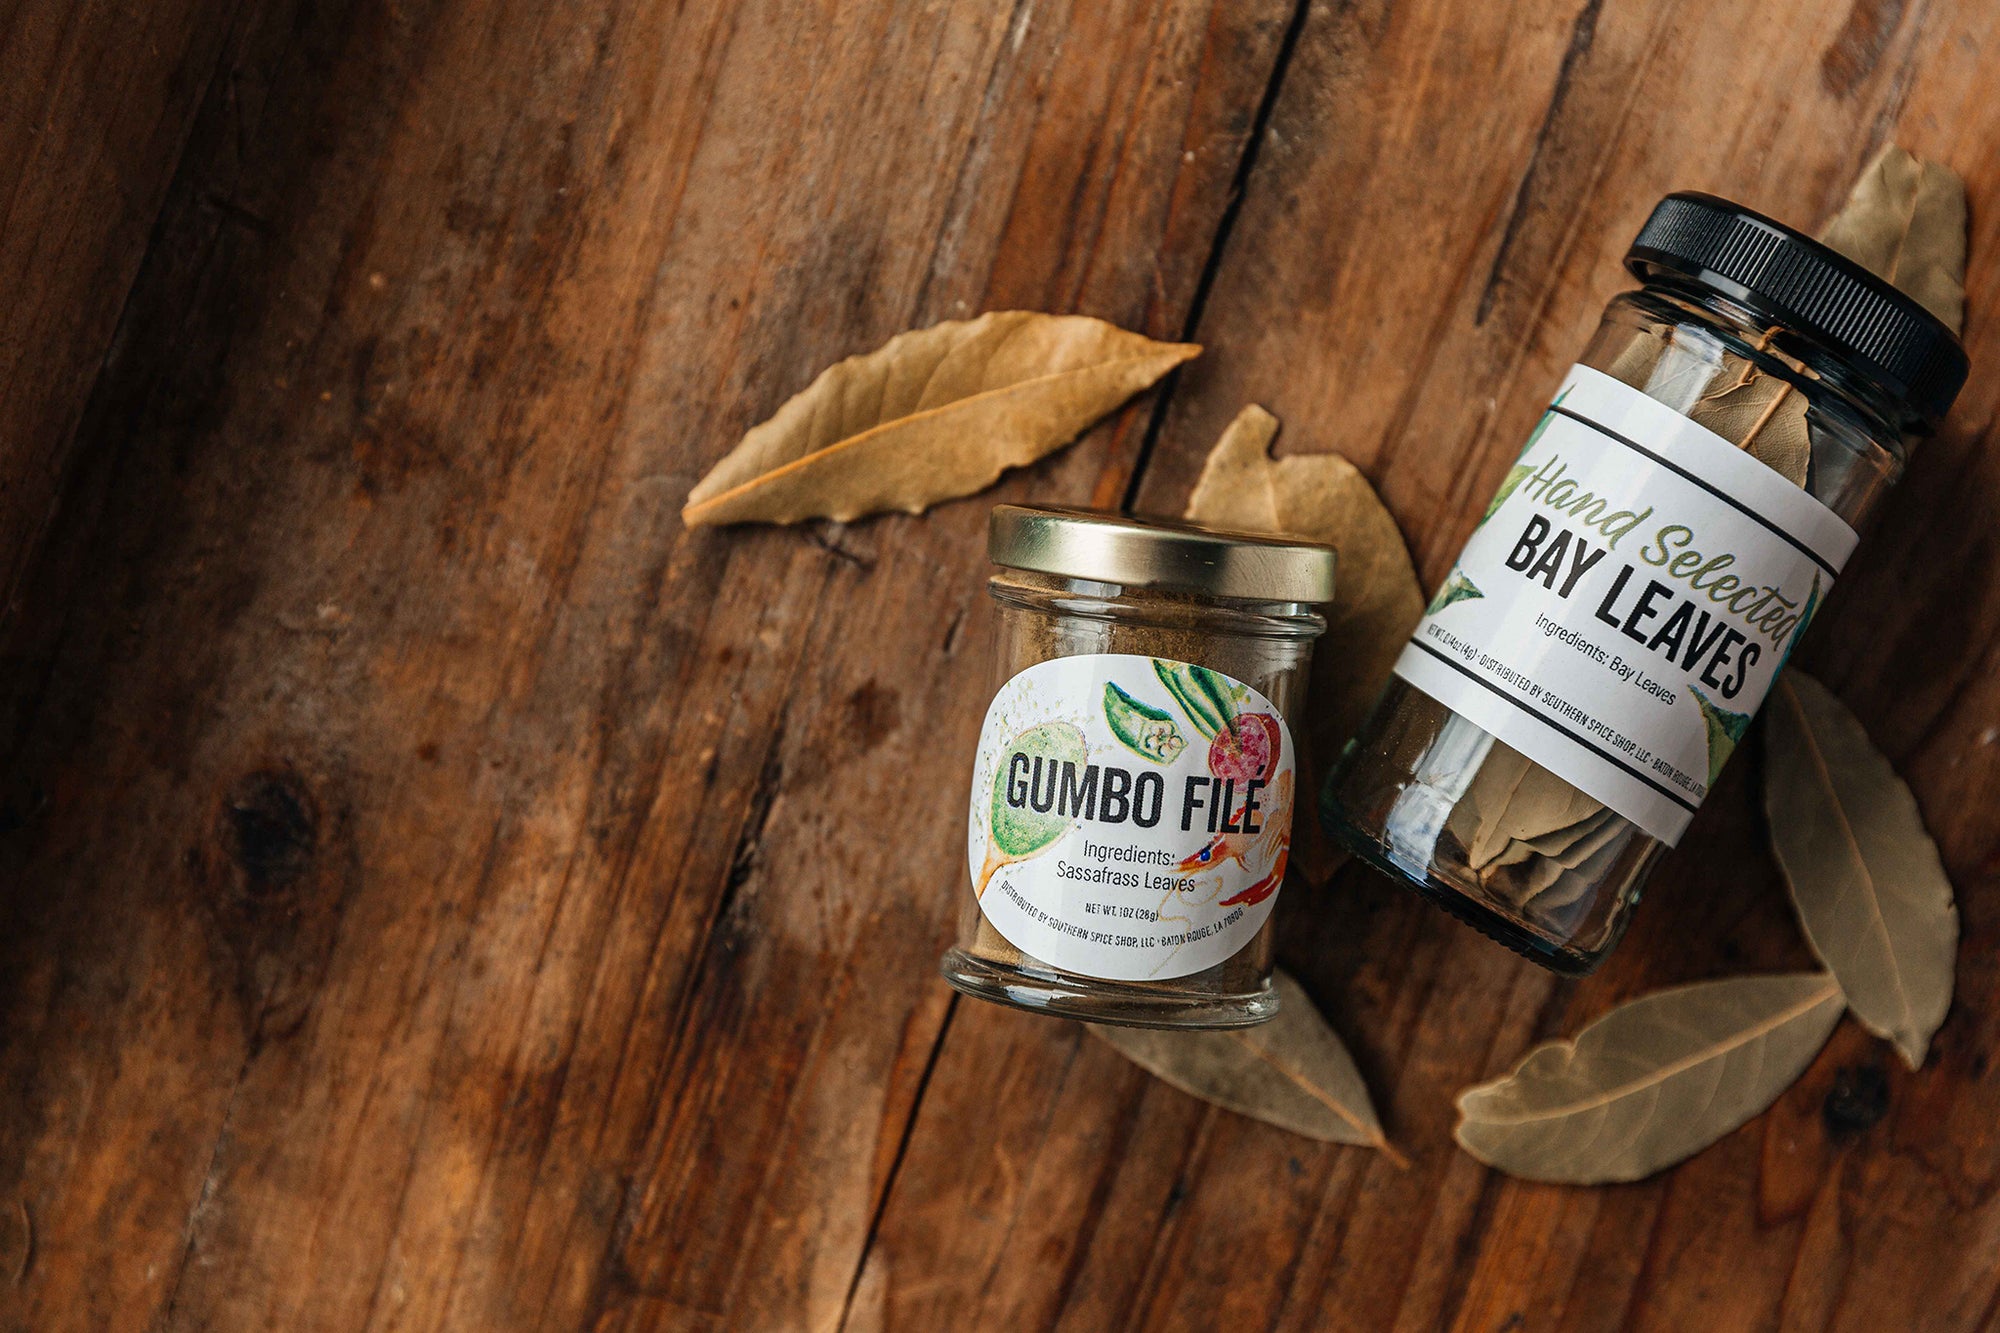 Filé Powder  Local Spice From Louisiana, United States of America